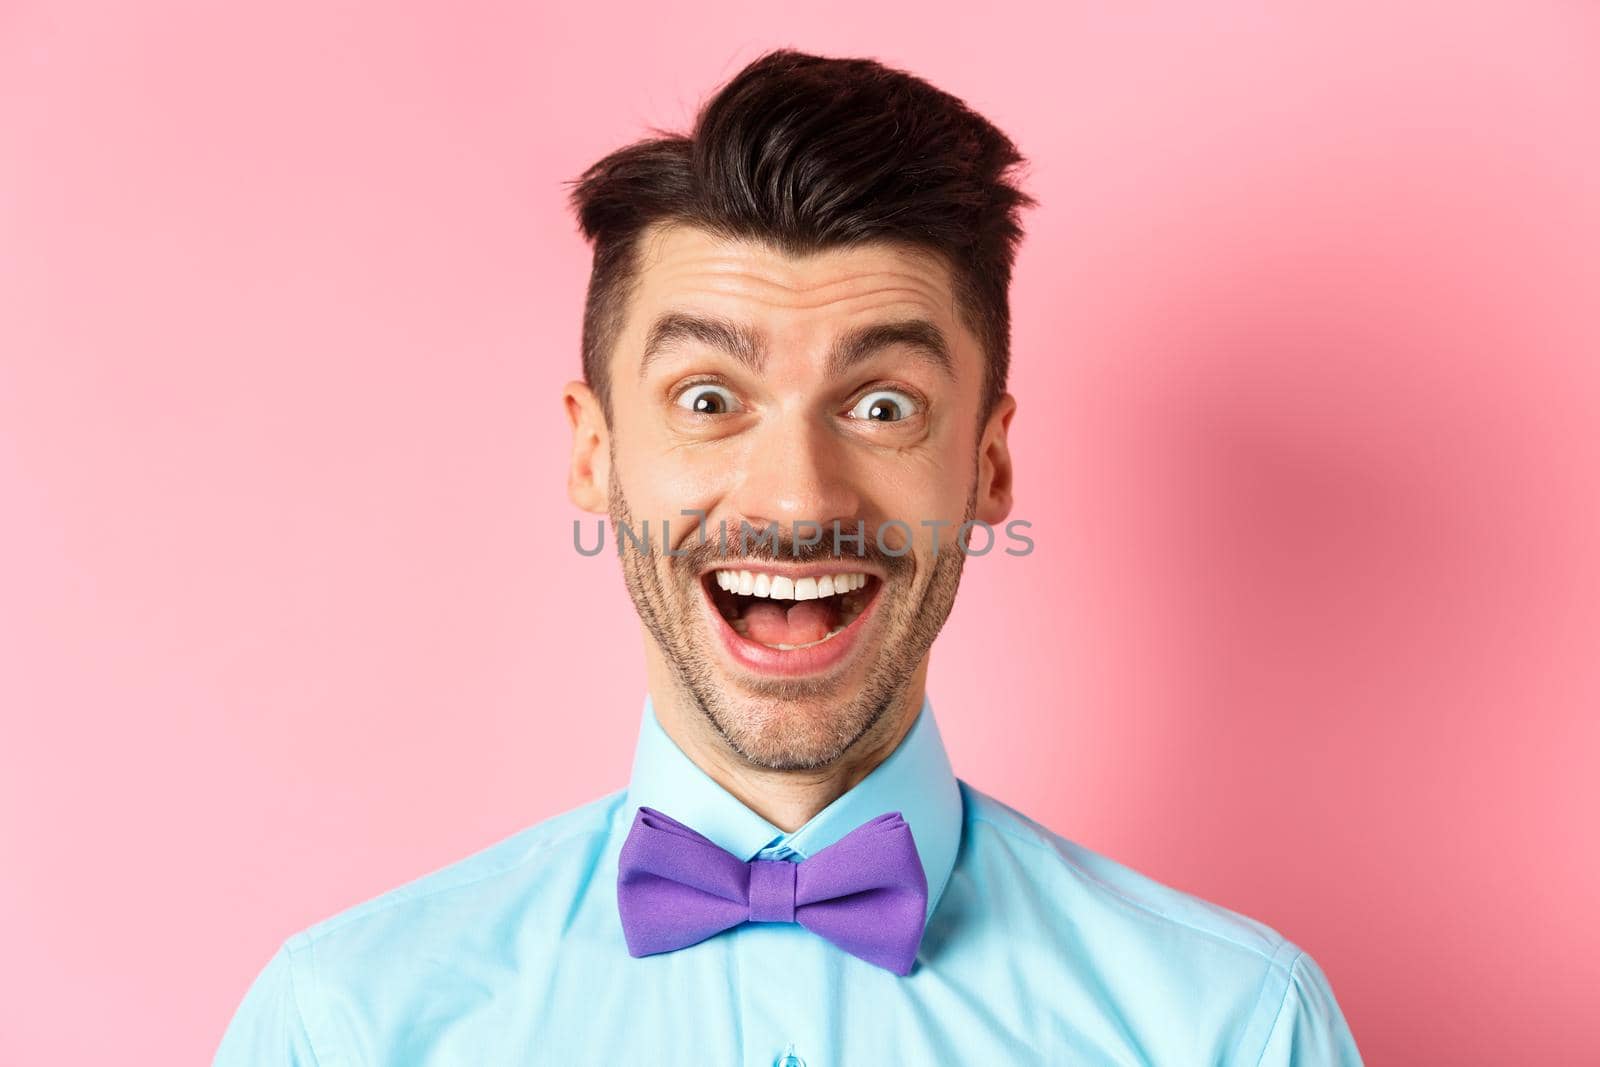 Close-up of surprised and happy young guy, open mouth and smiling amazed, checking out promo offer, standing in bow-tie over pink background.